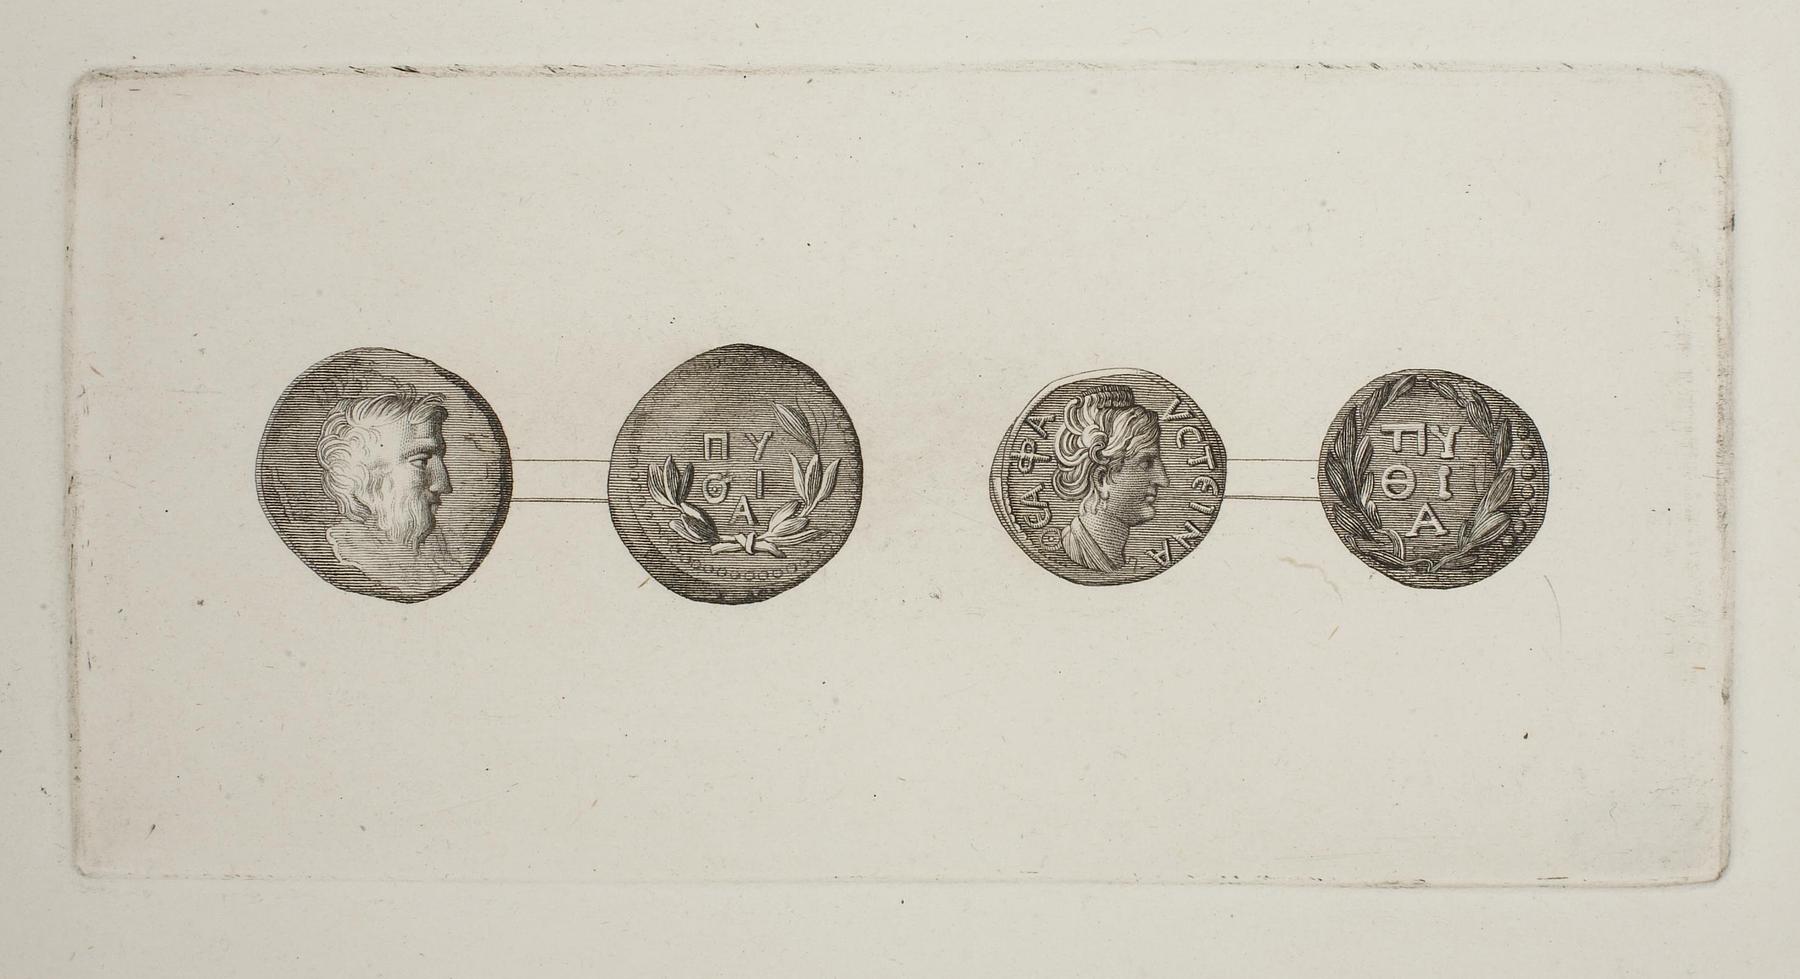 Greek coins obverse and reverse, E1574